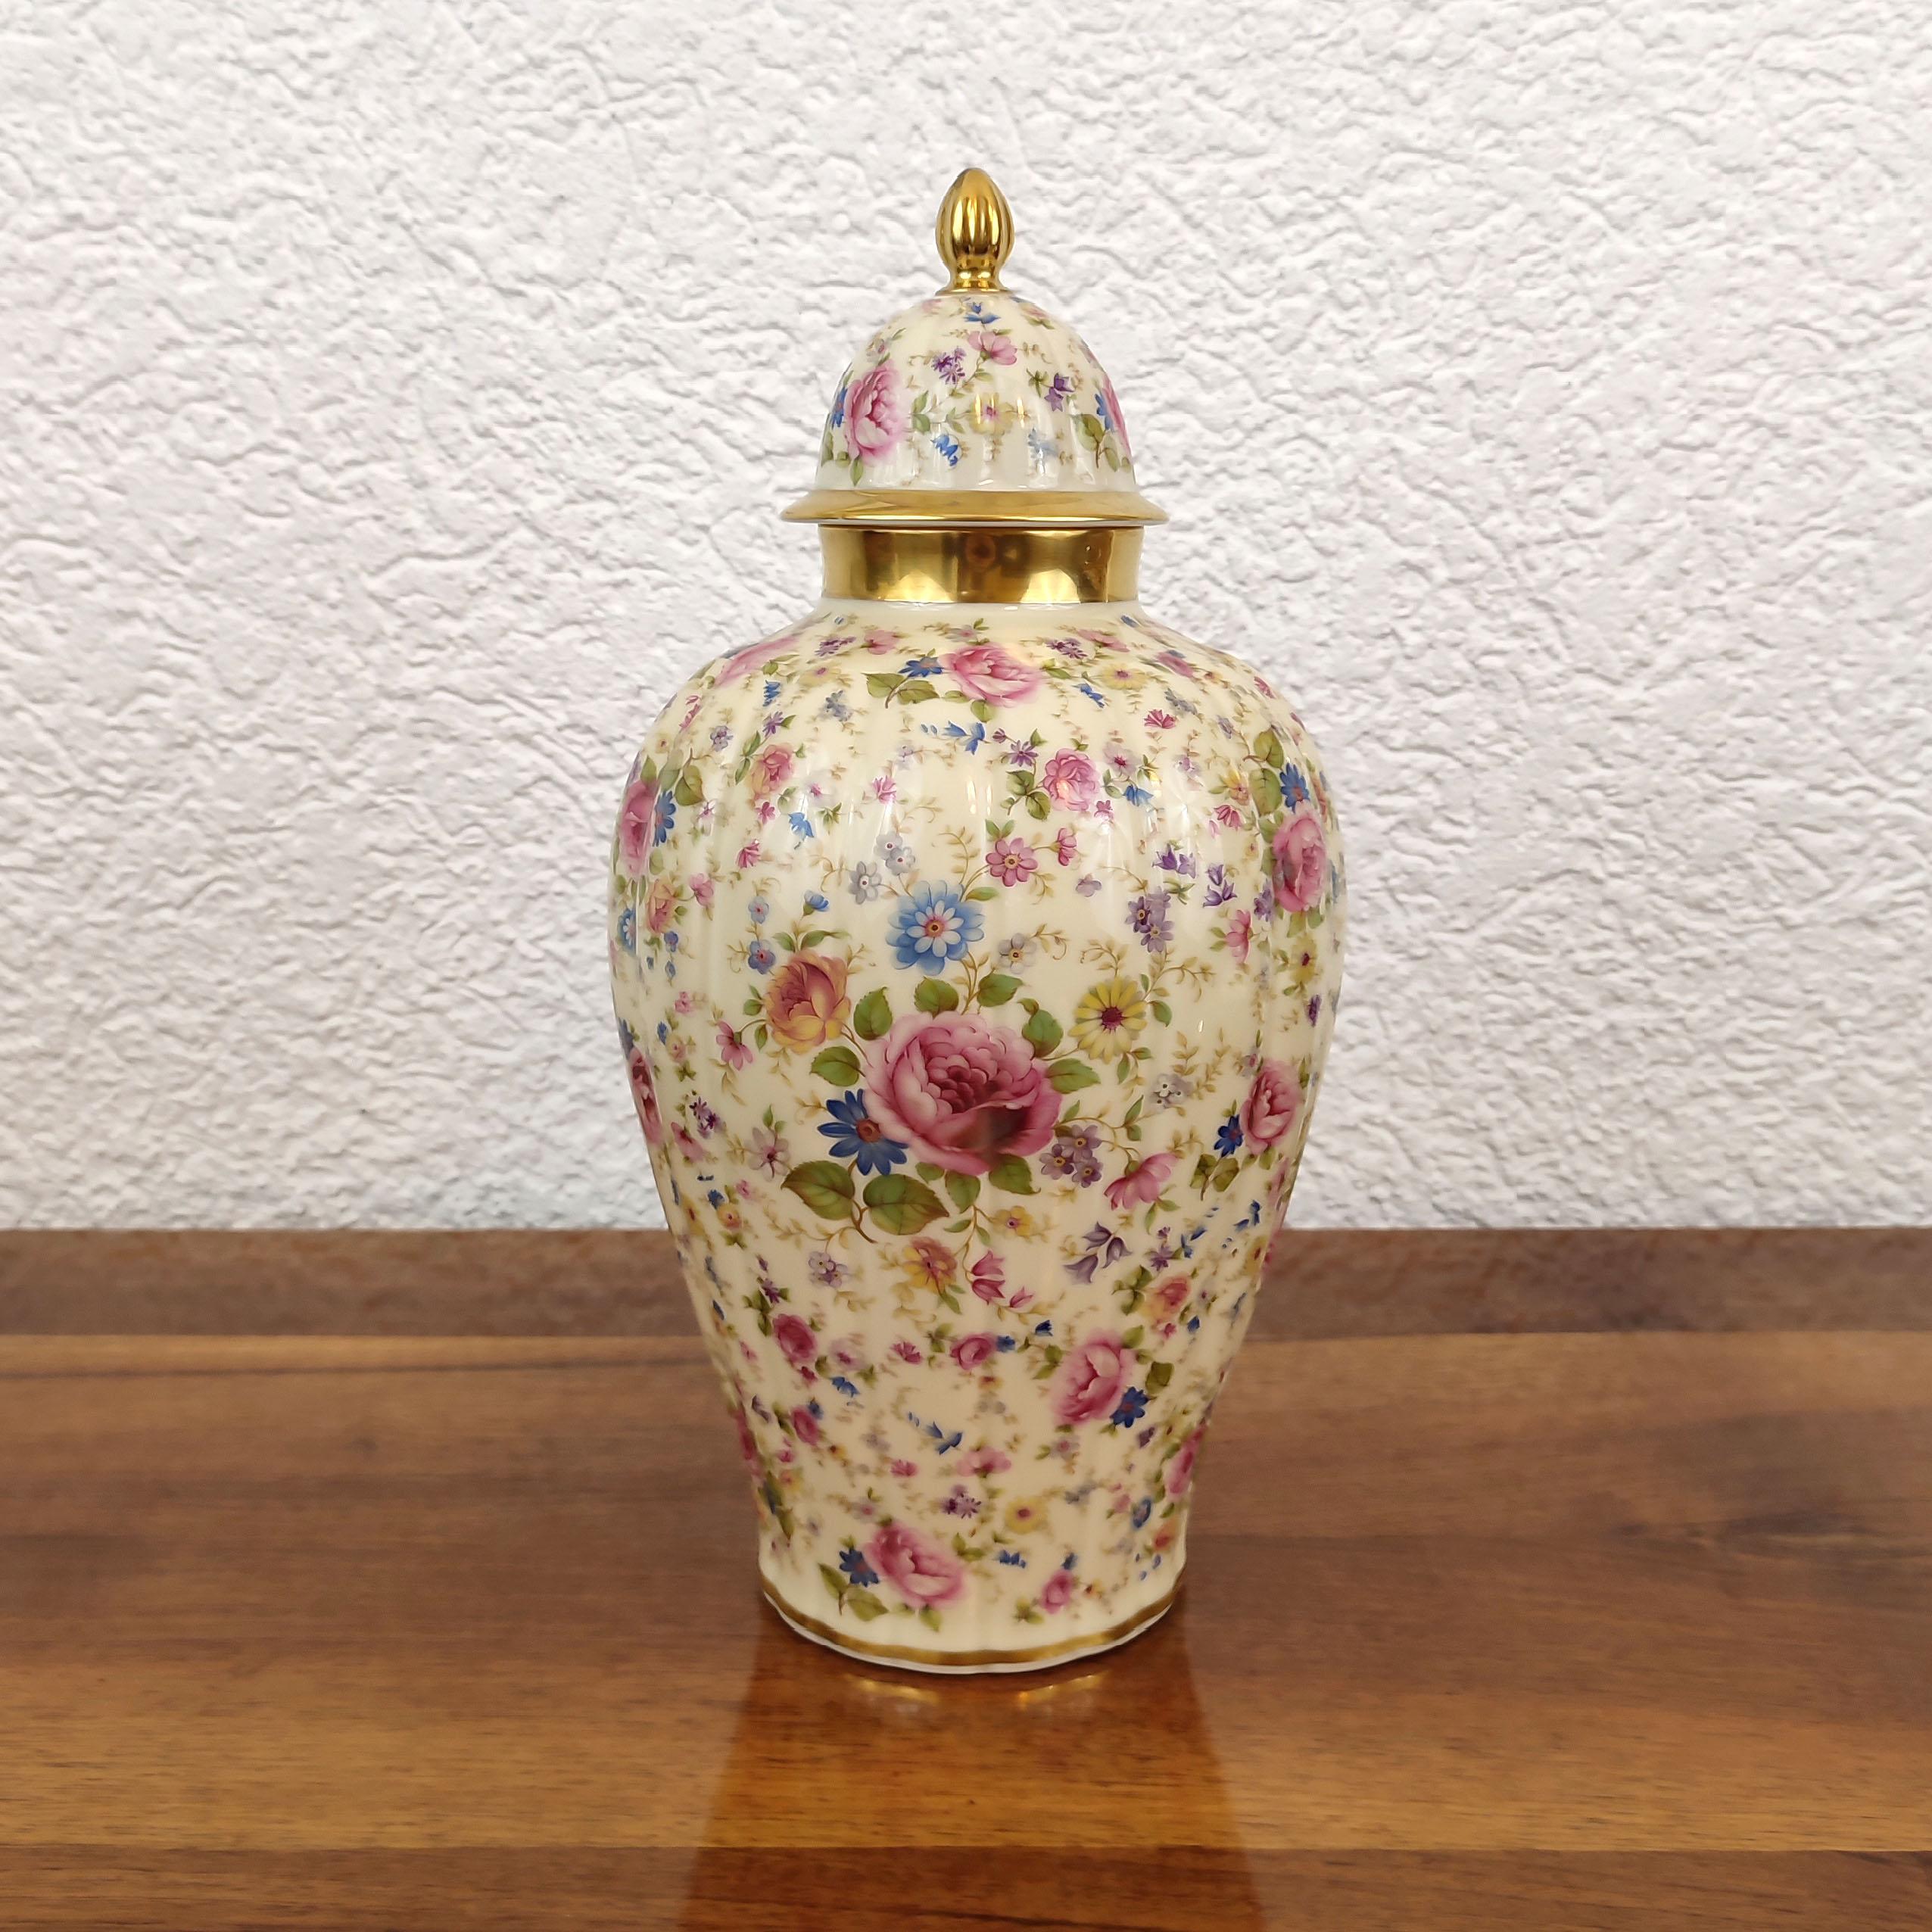 Thomas ivory Bavaria Urn with Lid, Circa 1946-1949. Green stamp Thomas Ivory Bavaria Germany US Zone 07091 46. Excellent Condition

A sensational piece with beautiful floral design, chintz like, in pastel colors in various shades of blue, green,